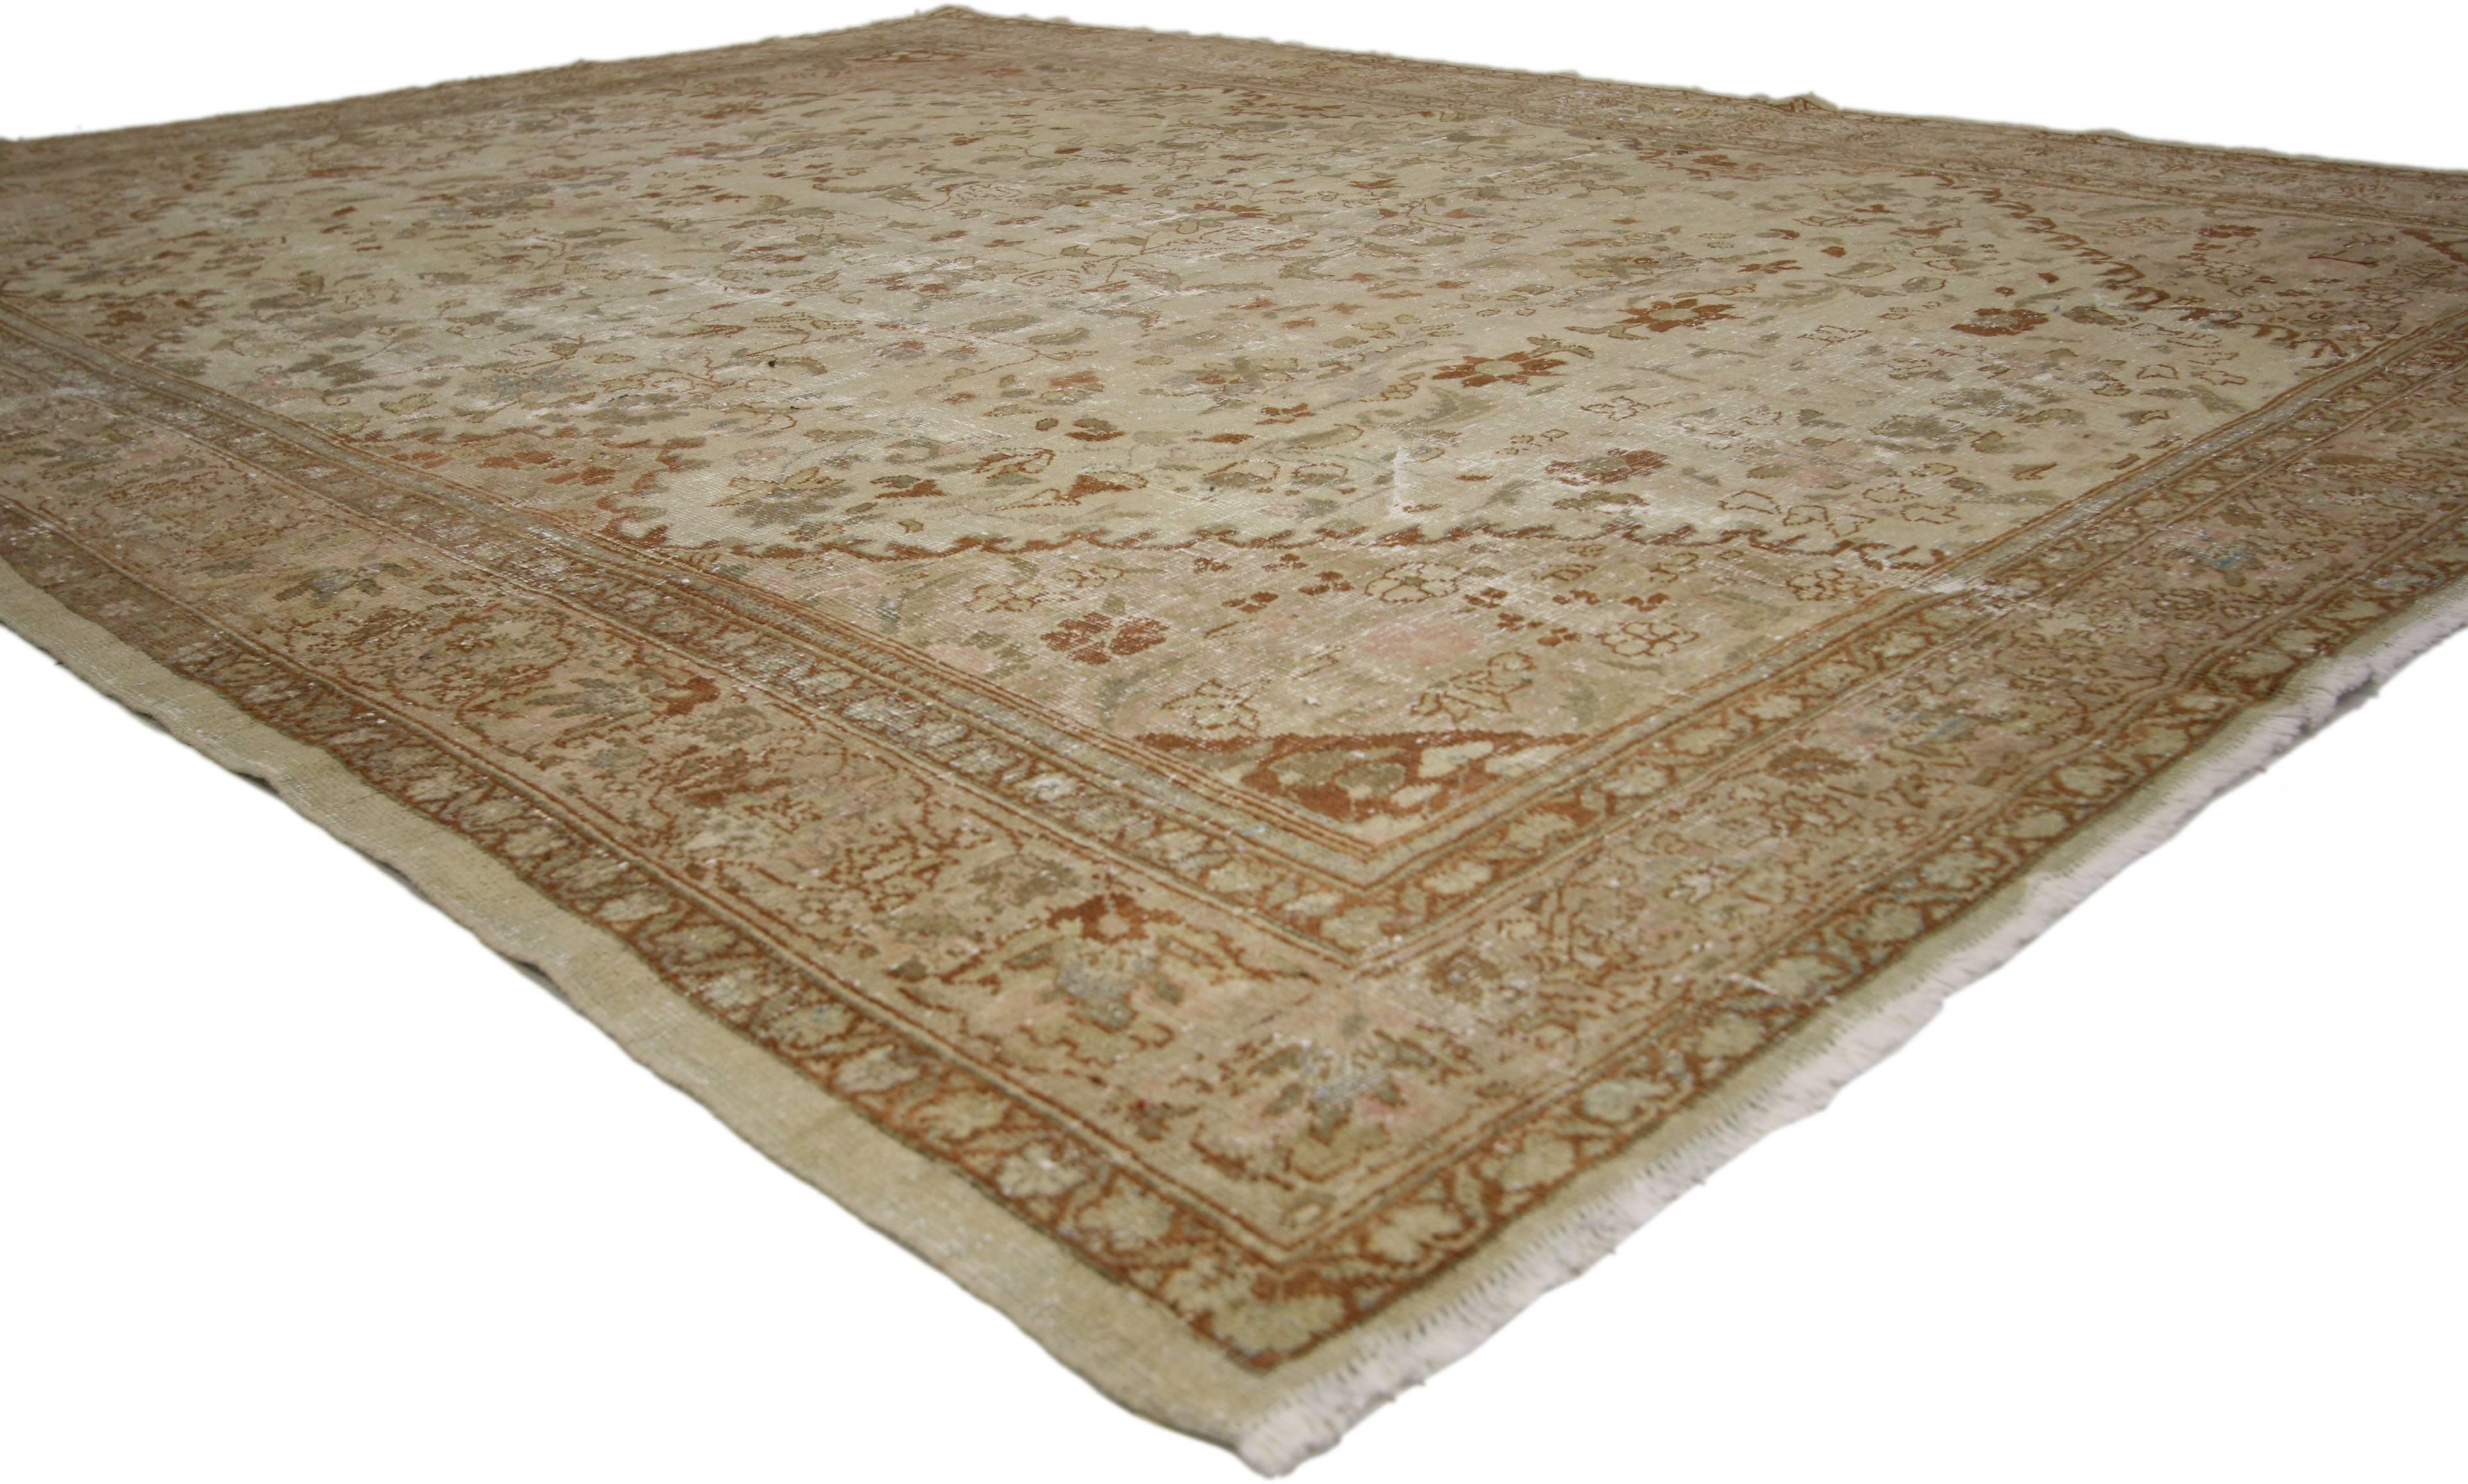 74939 distressed antique Persian Mahal rug with shabby chic Farmhouse Style. With its soft, subtle hues and cozy simplicity, this hand knotted wool distressed antique Persian Mahal rug charms with ease and beautifully embodies Cotswold Cottage style